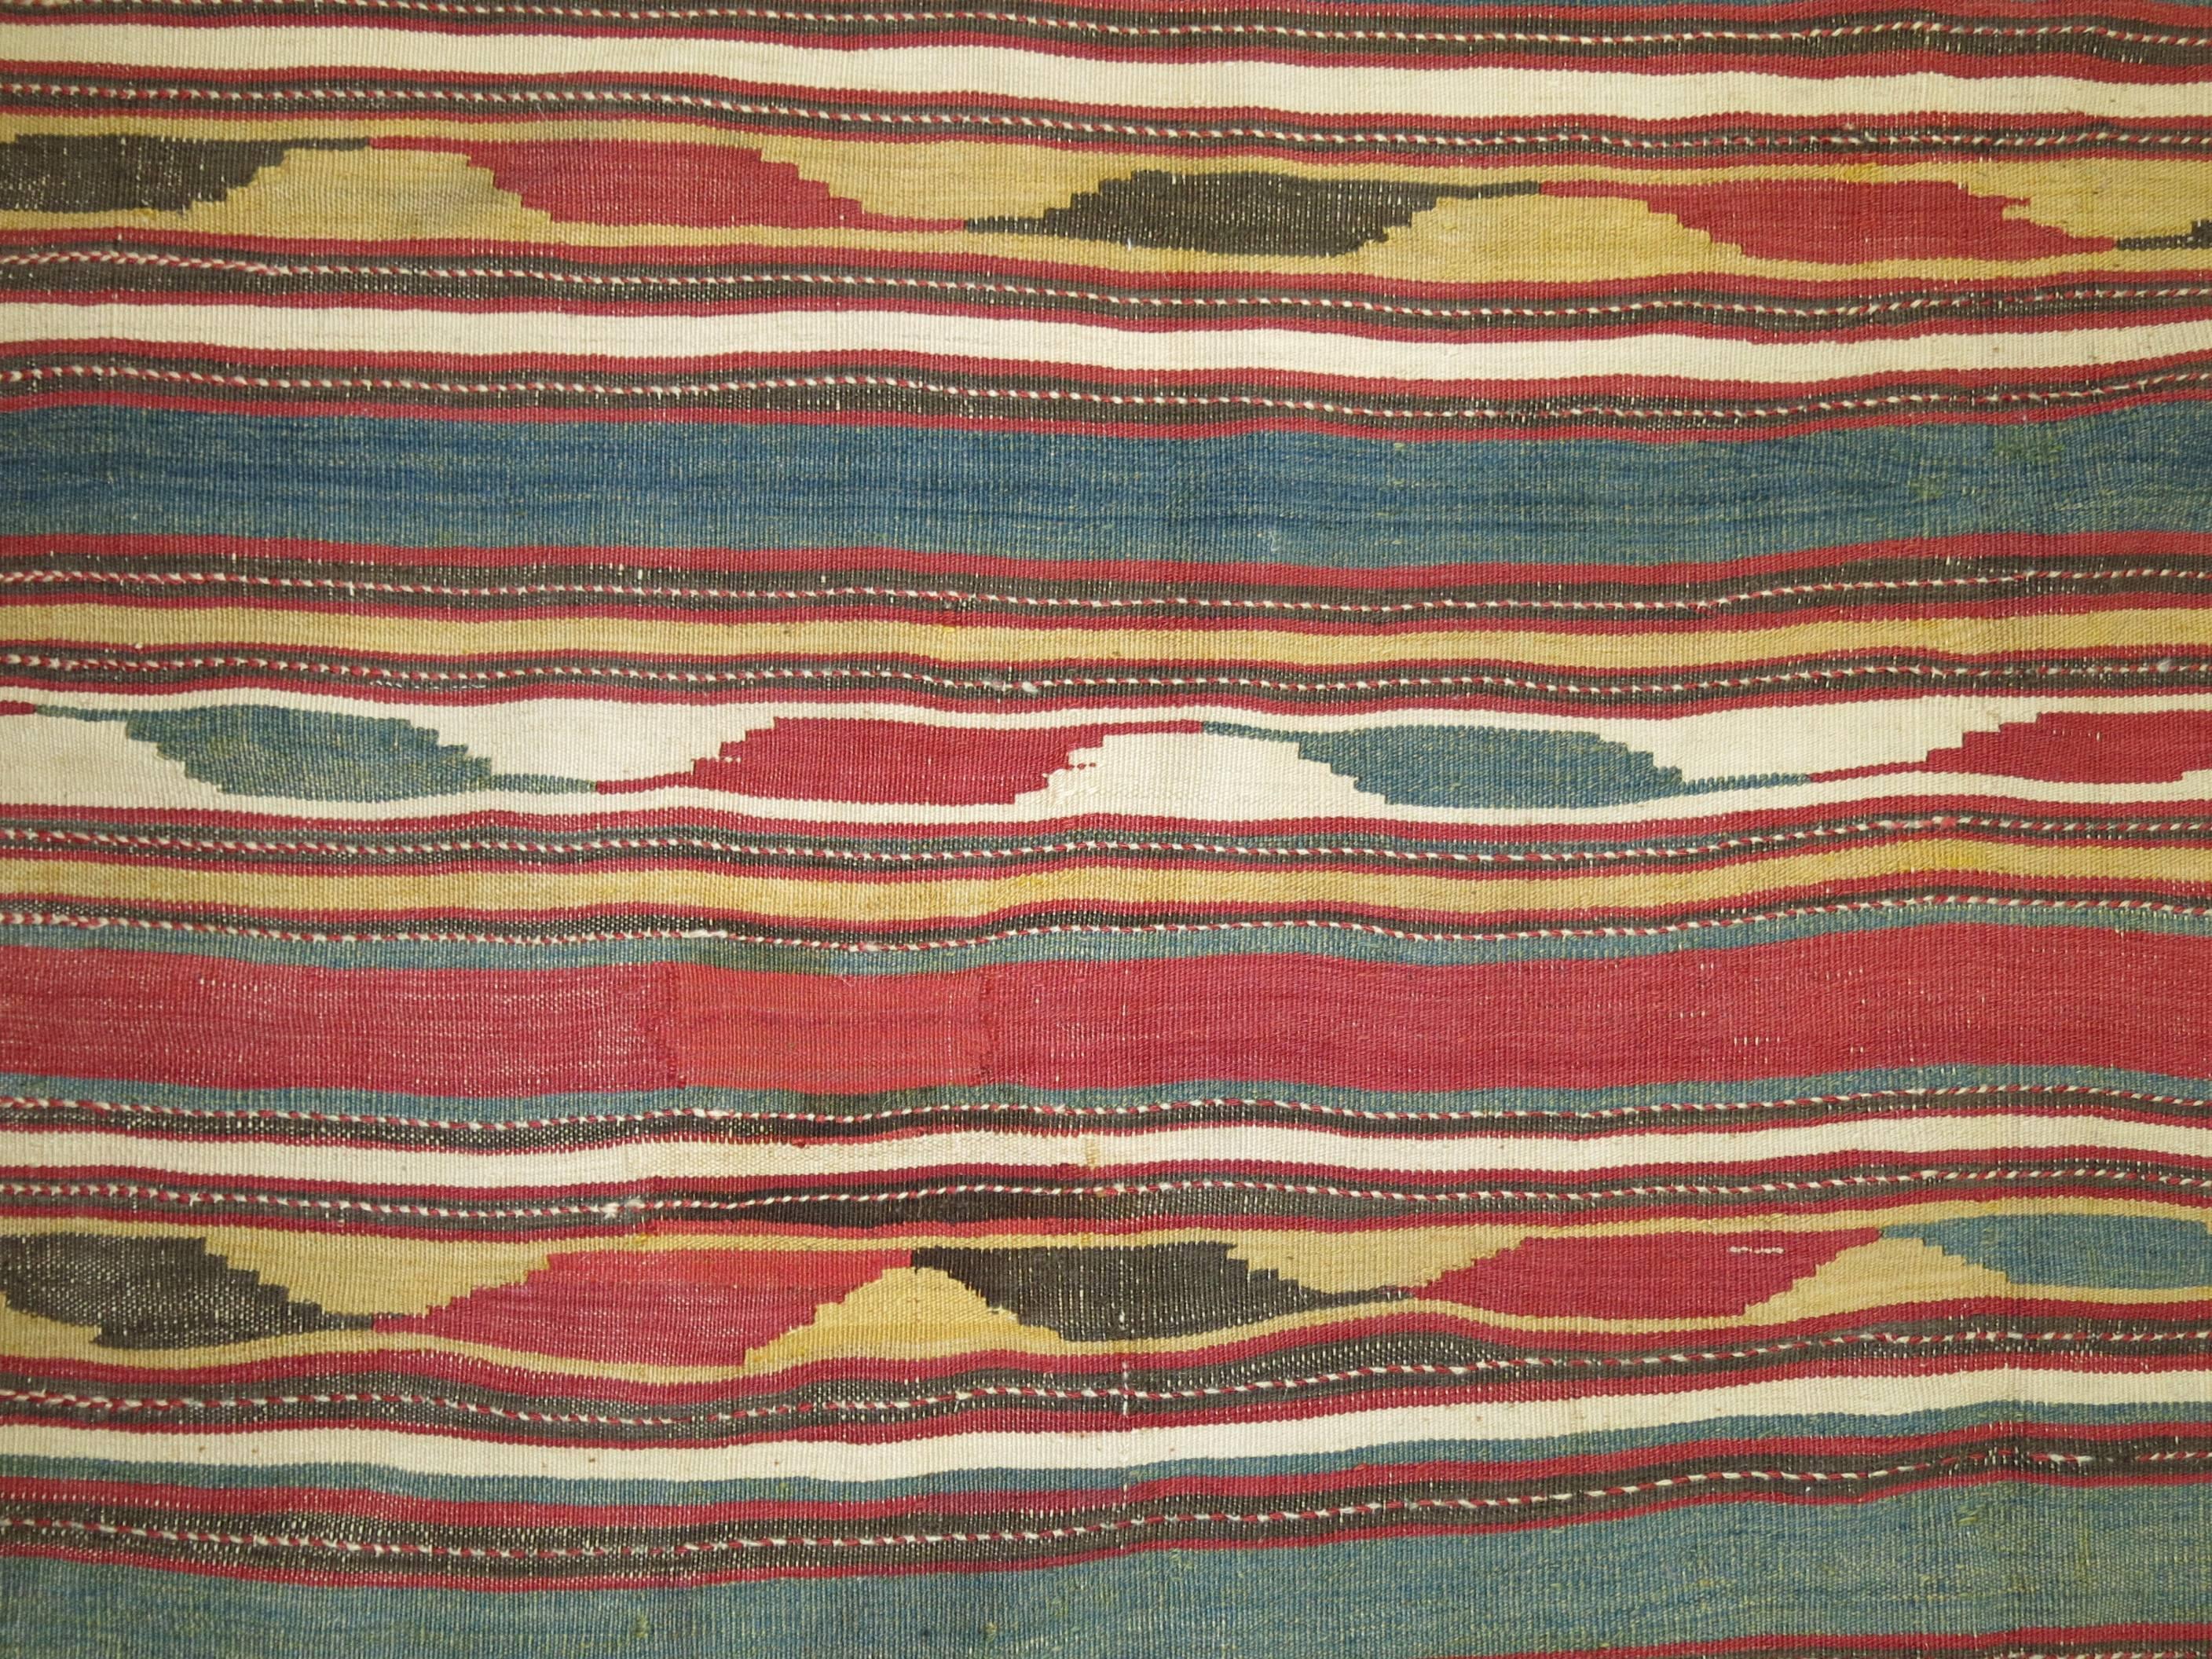 Tribal Rustic Persian Wool Handmade Kilim Green Mustard Red Accent For Sale 2